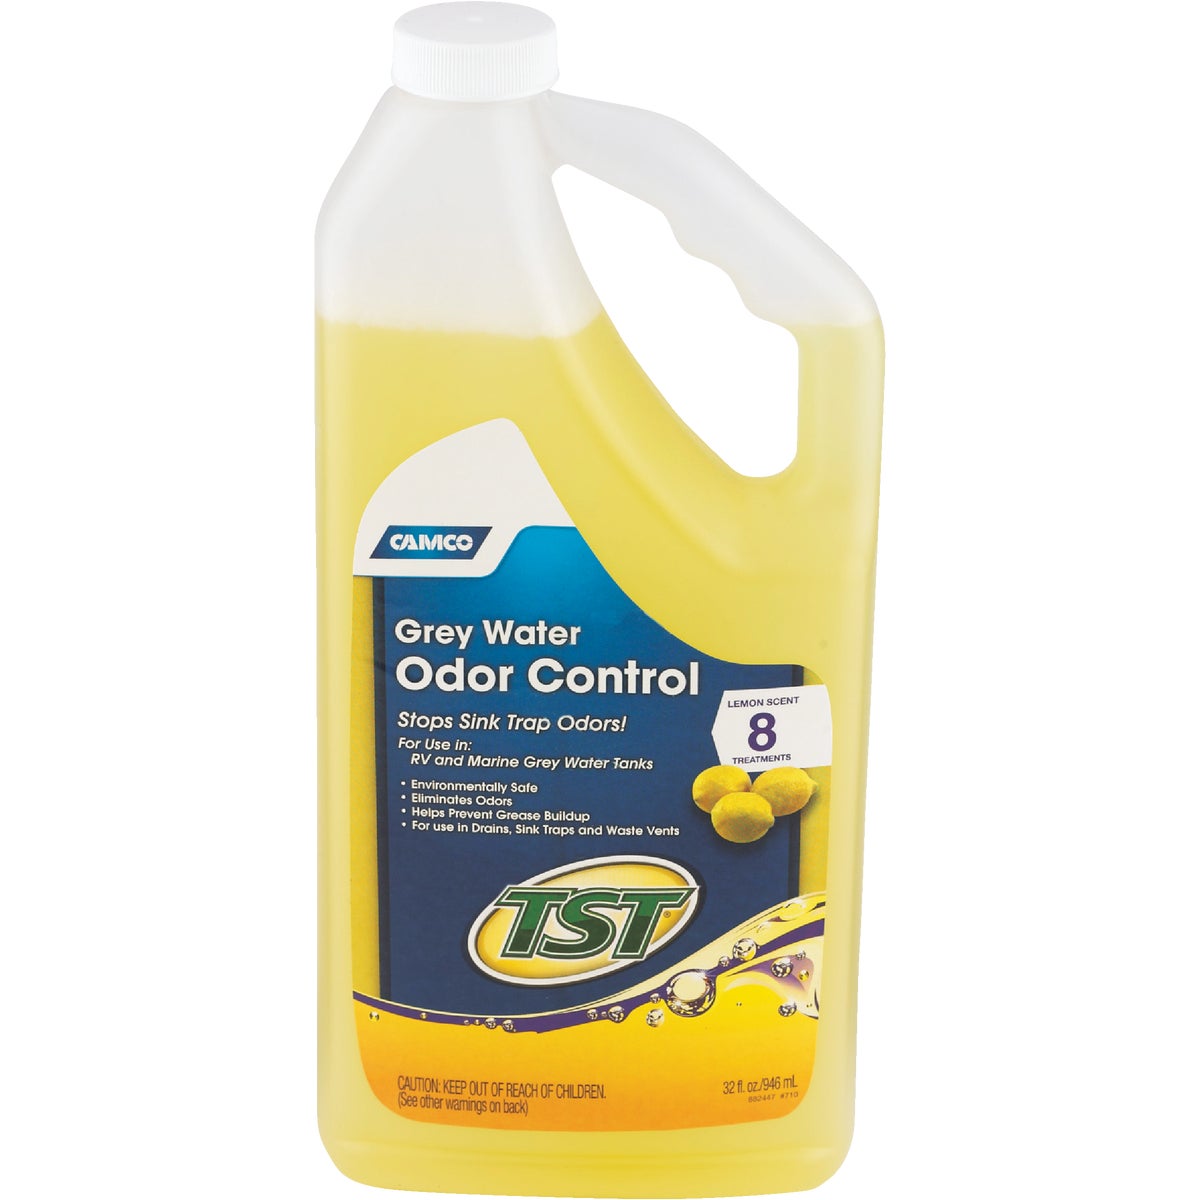 Item 577254, Concentrated treatment removes grease buildup in your grey water tank, sink